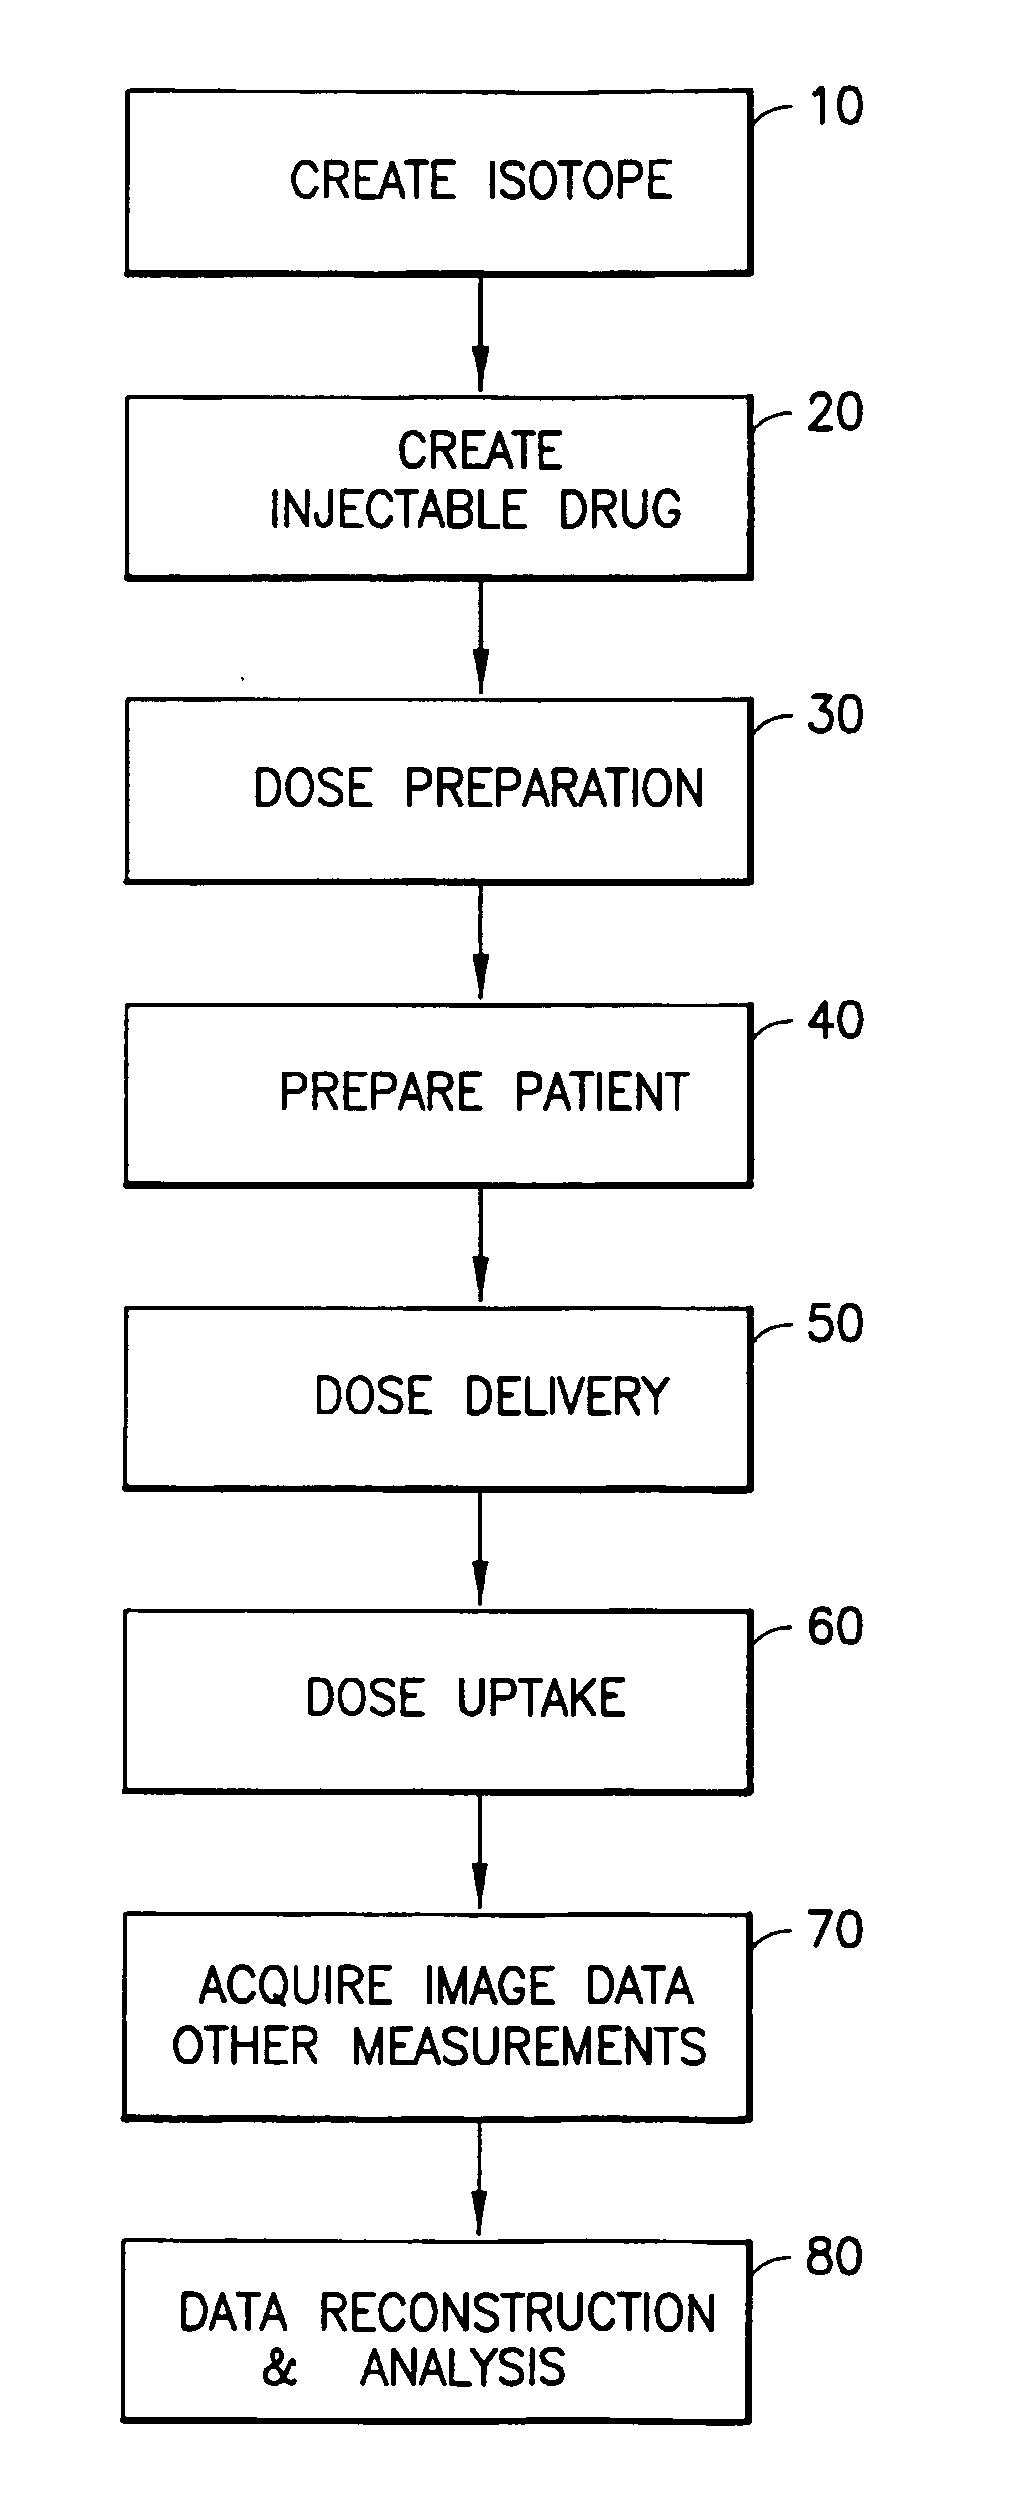 Systems For Integrated Radiopharmaceutical Generation, Preparation, Transportation and Administration